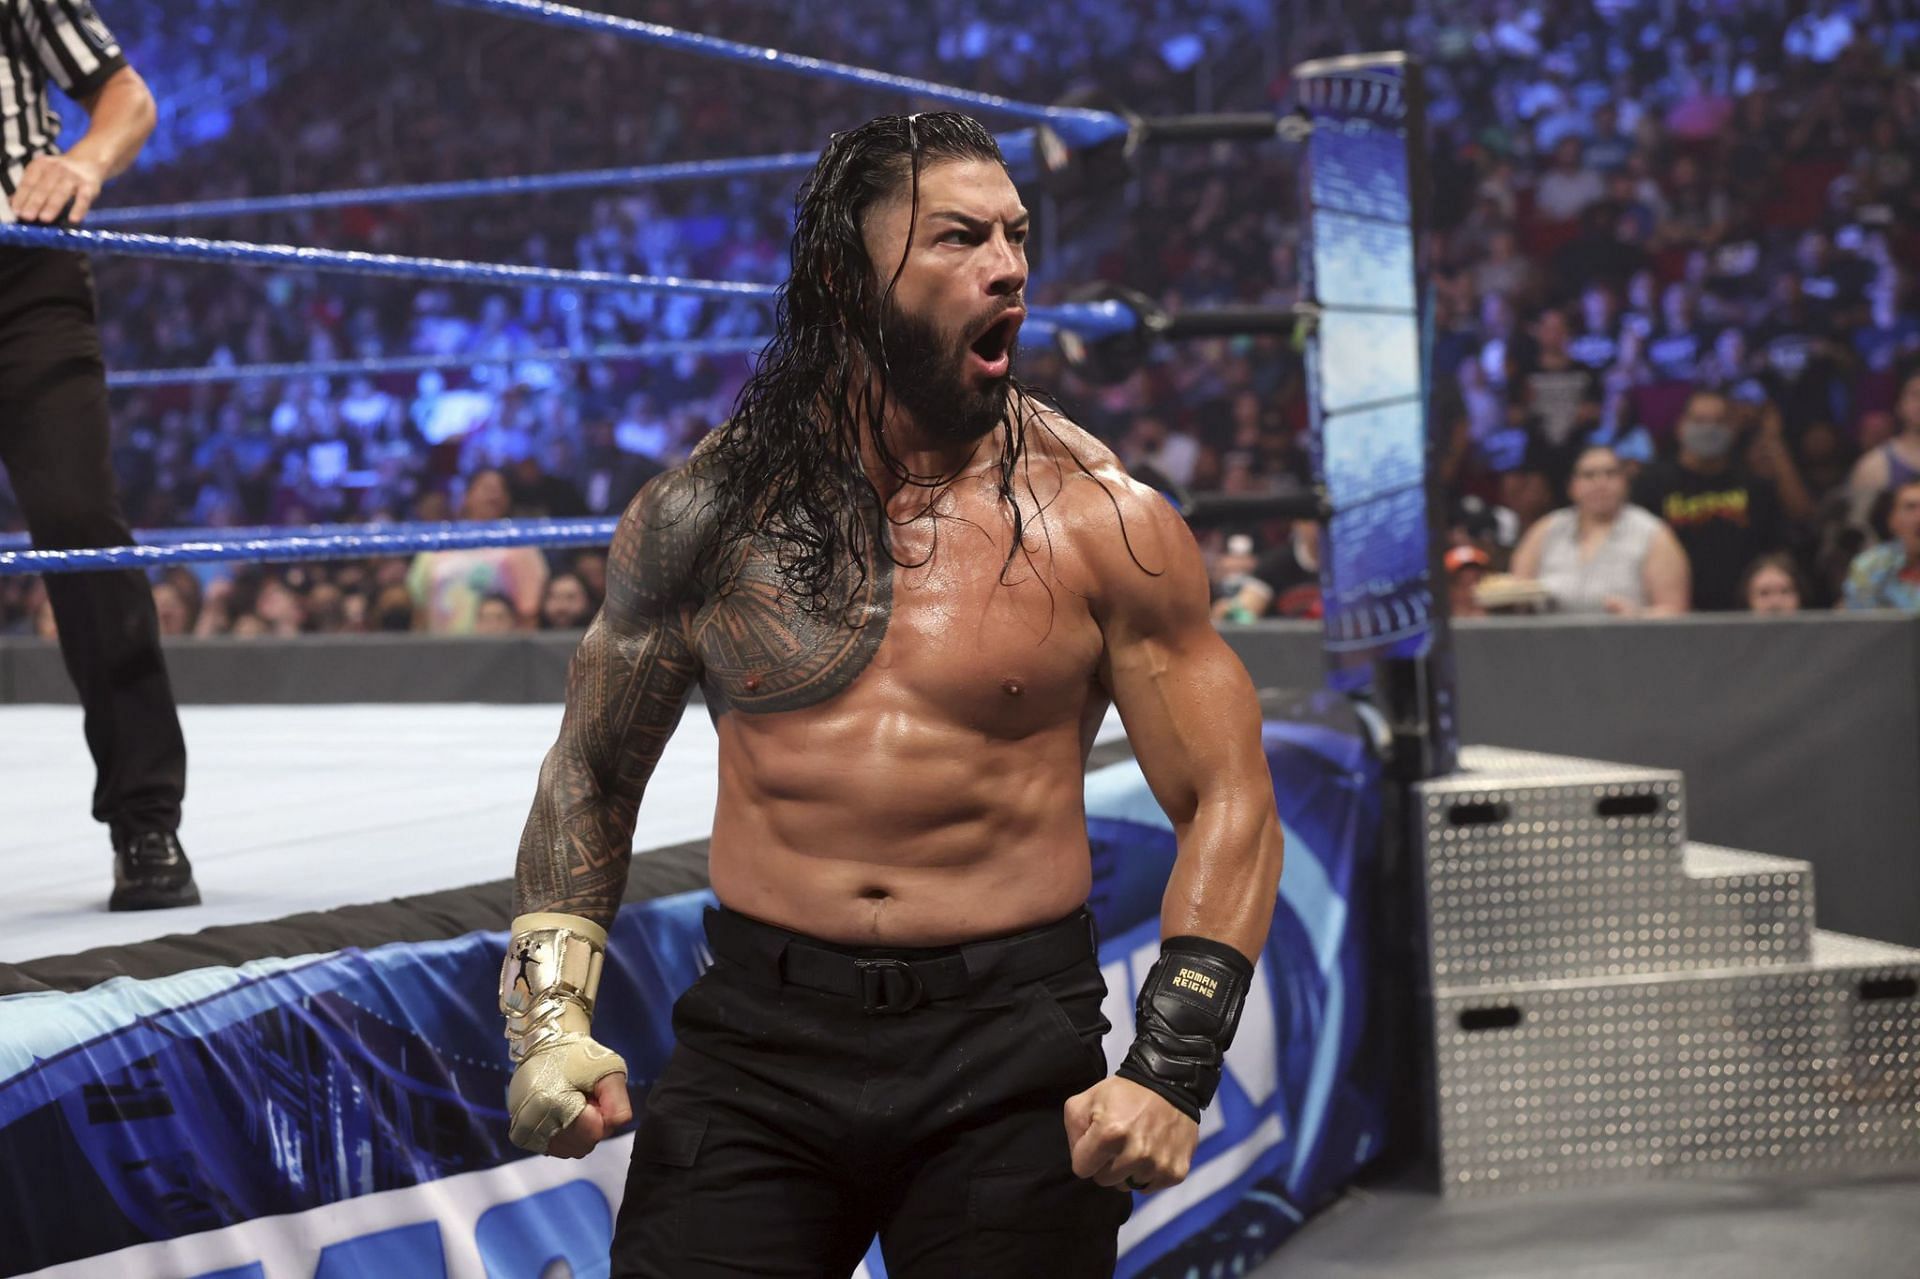 Roman Reigns was recently victorious at Survivor Series 2021